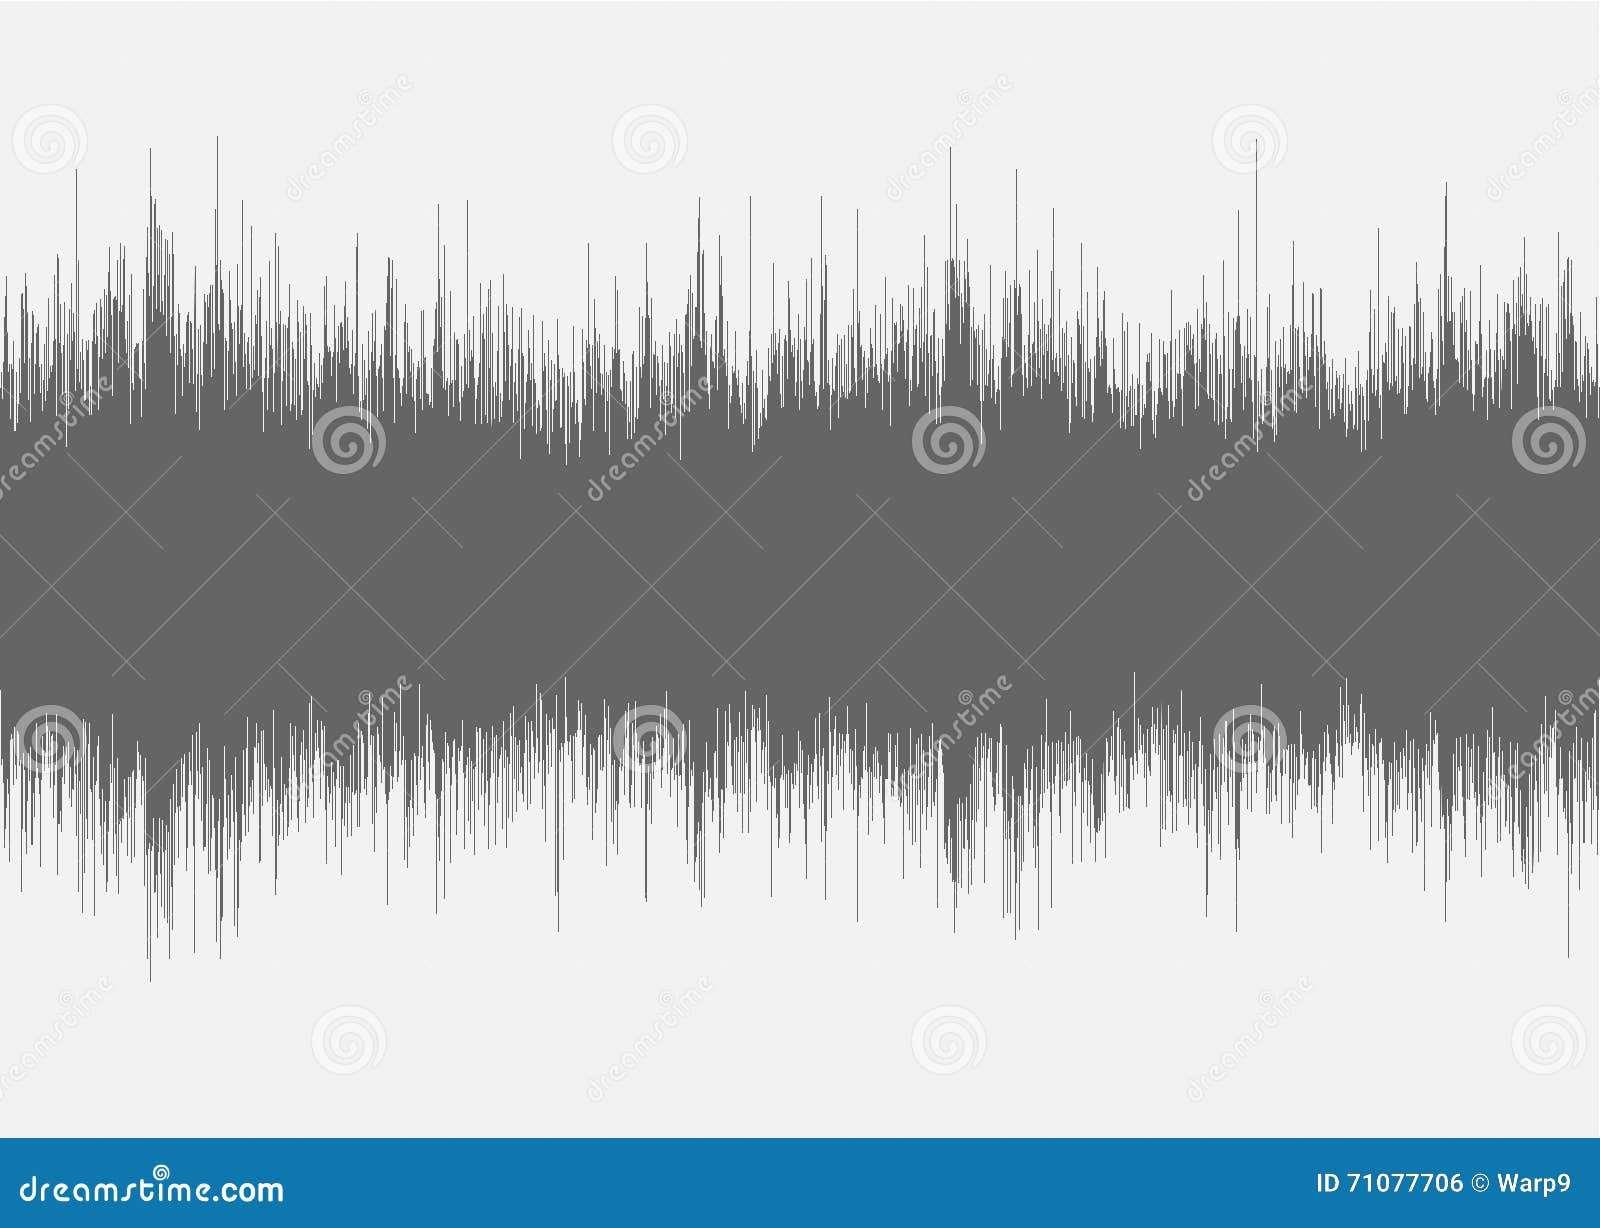 Royalty-Free Jungle Sound Effects & Audio - Dreamstime